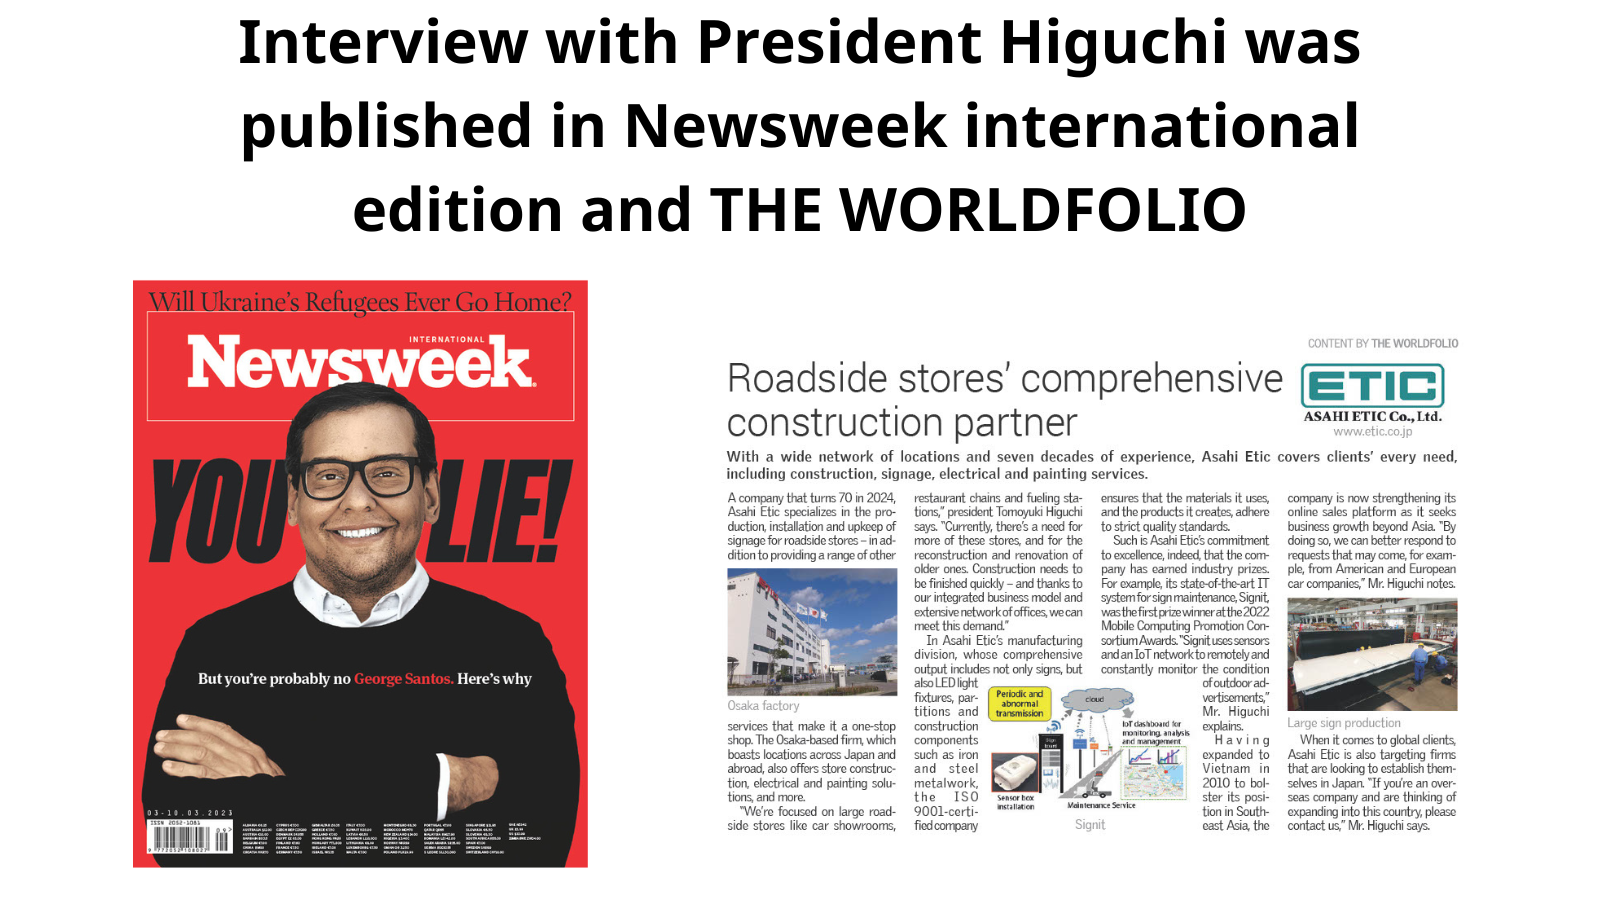 Interview with President Higuchi was published in Newsweek international edition and THE WORLDFOLIO